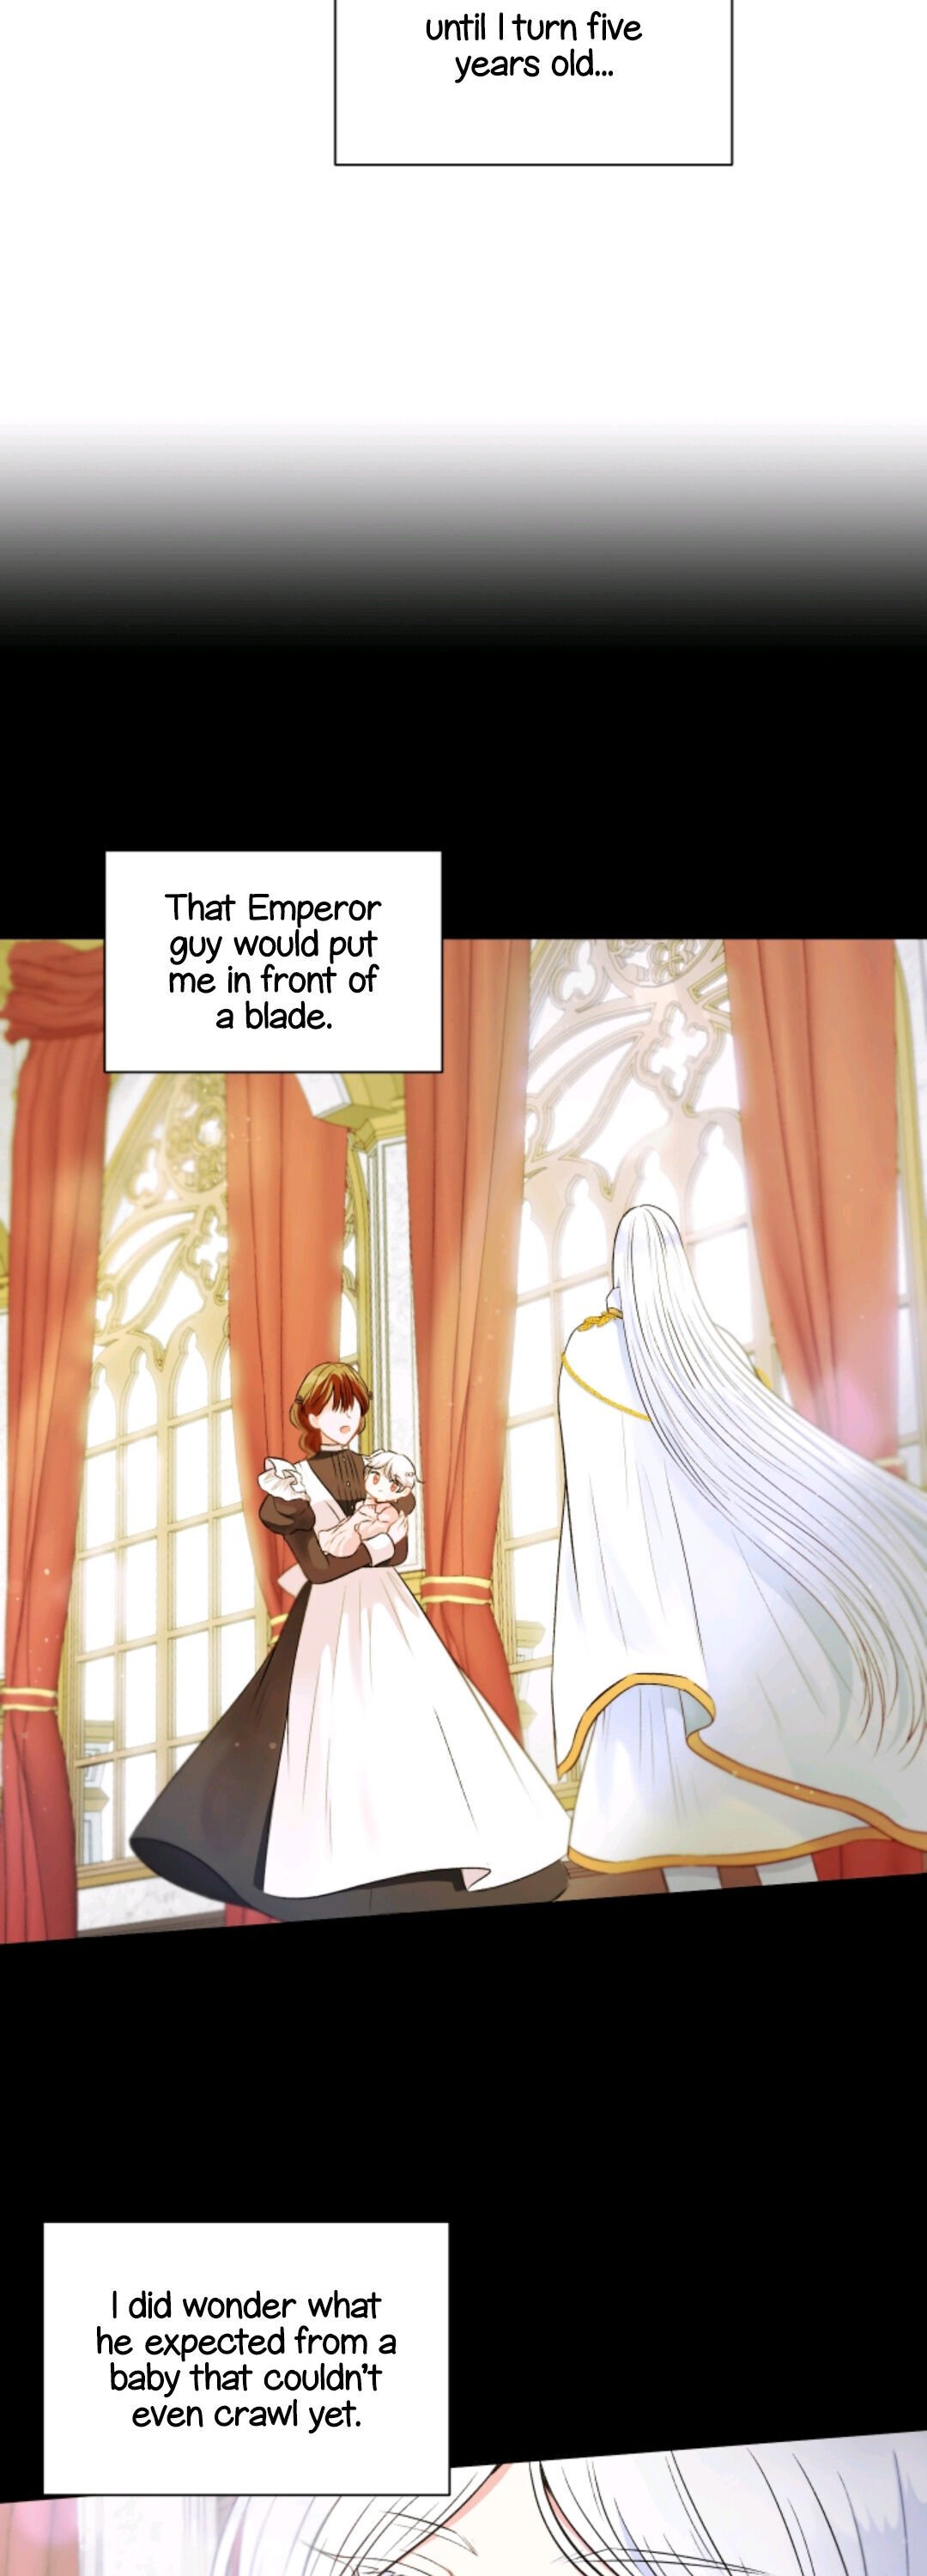 The Princess is Evil chapter 3